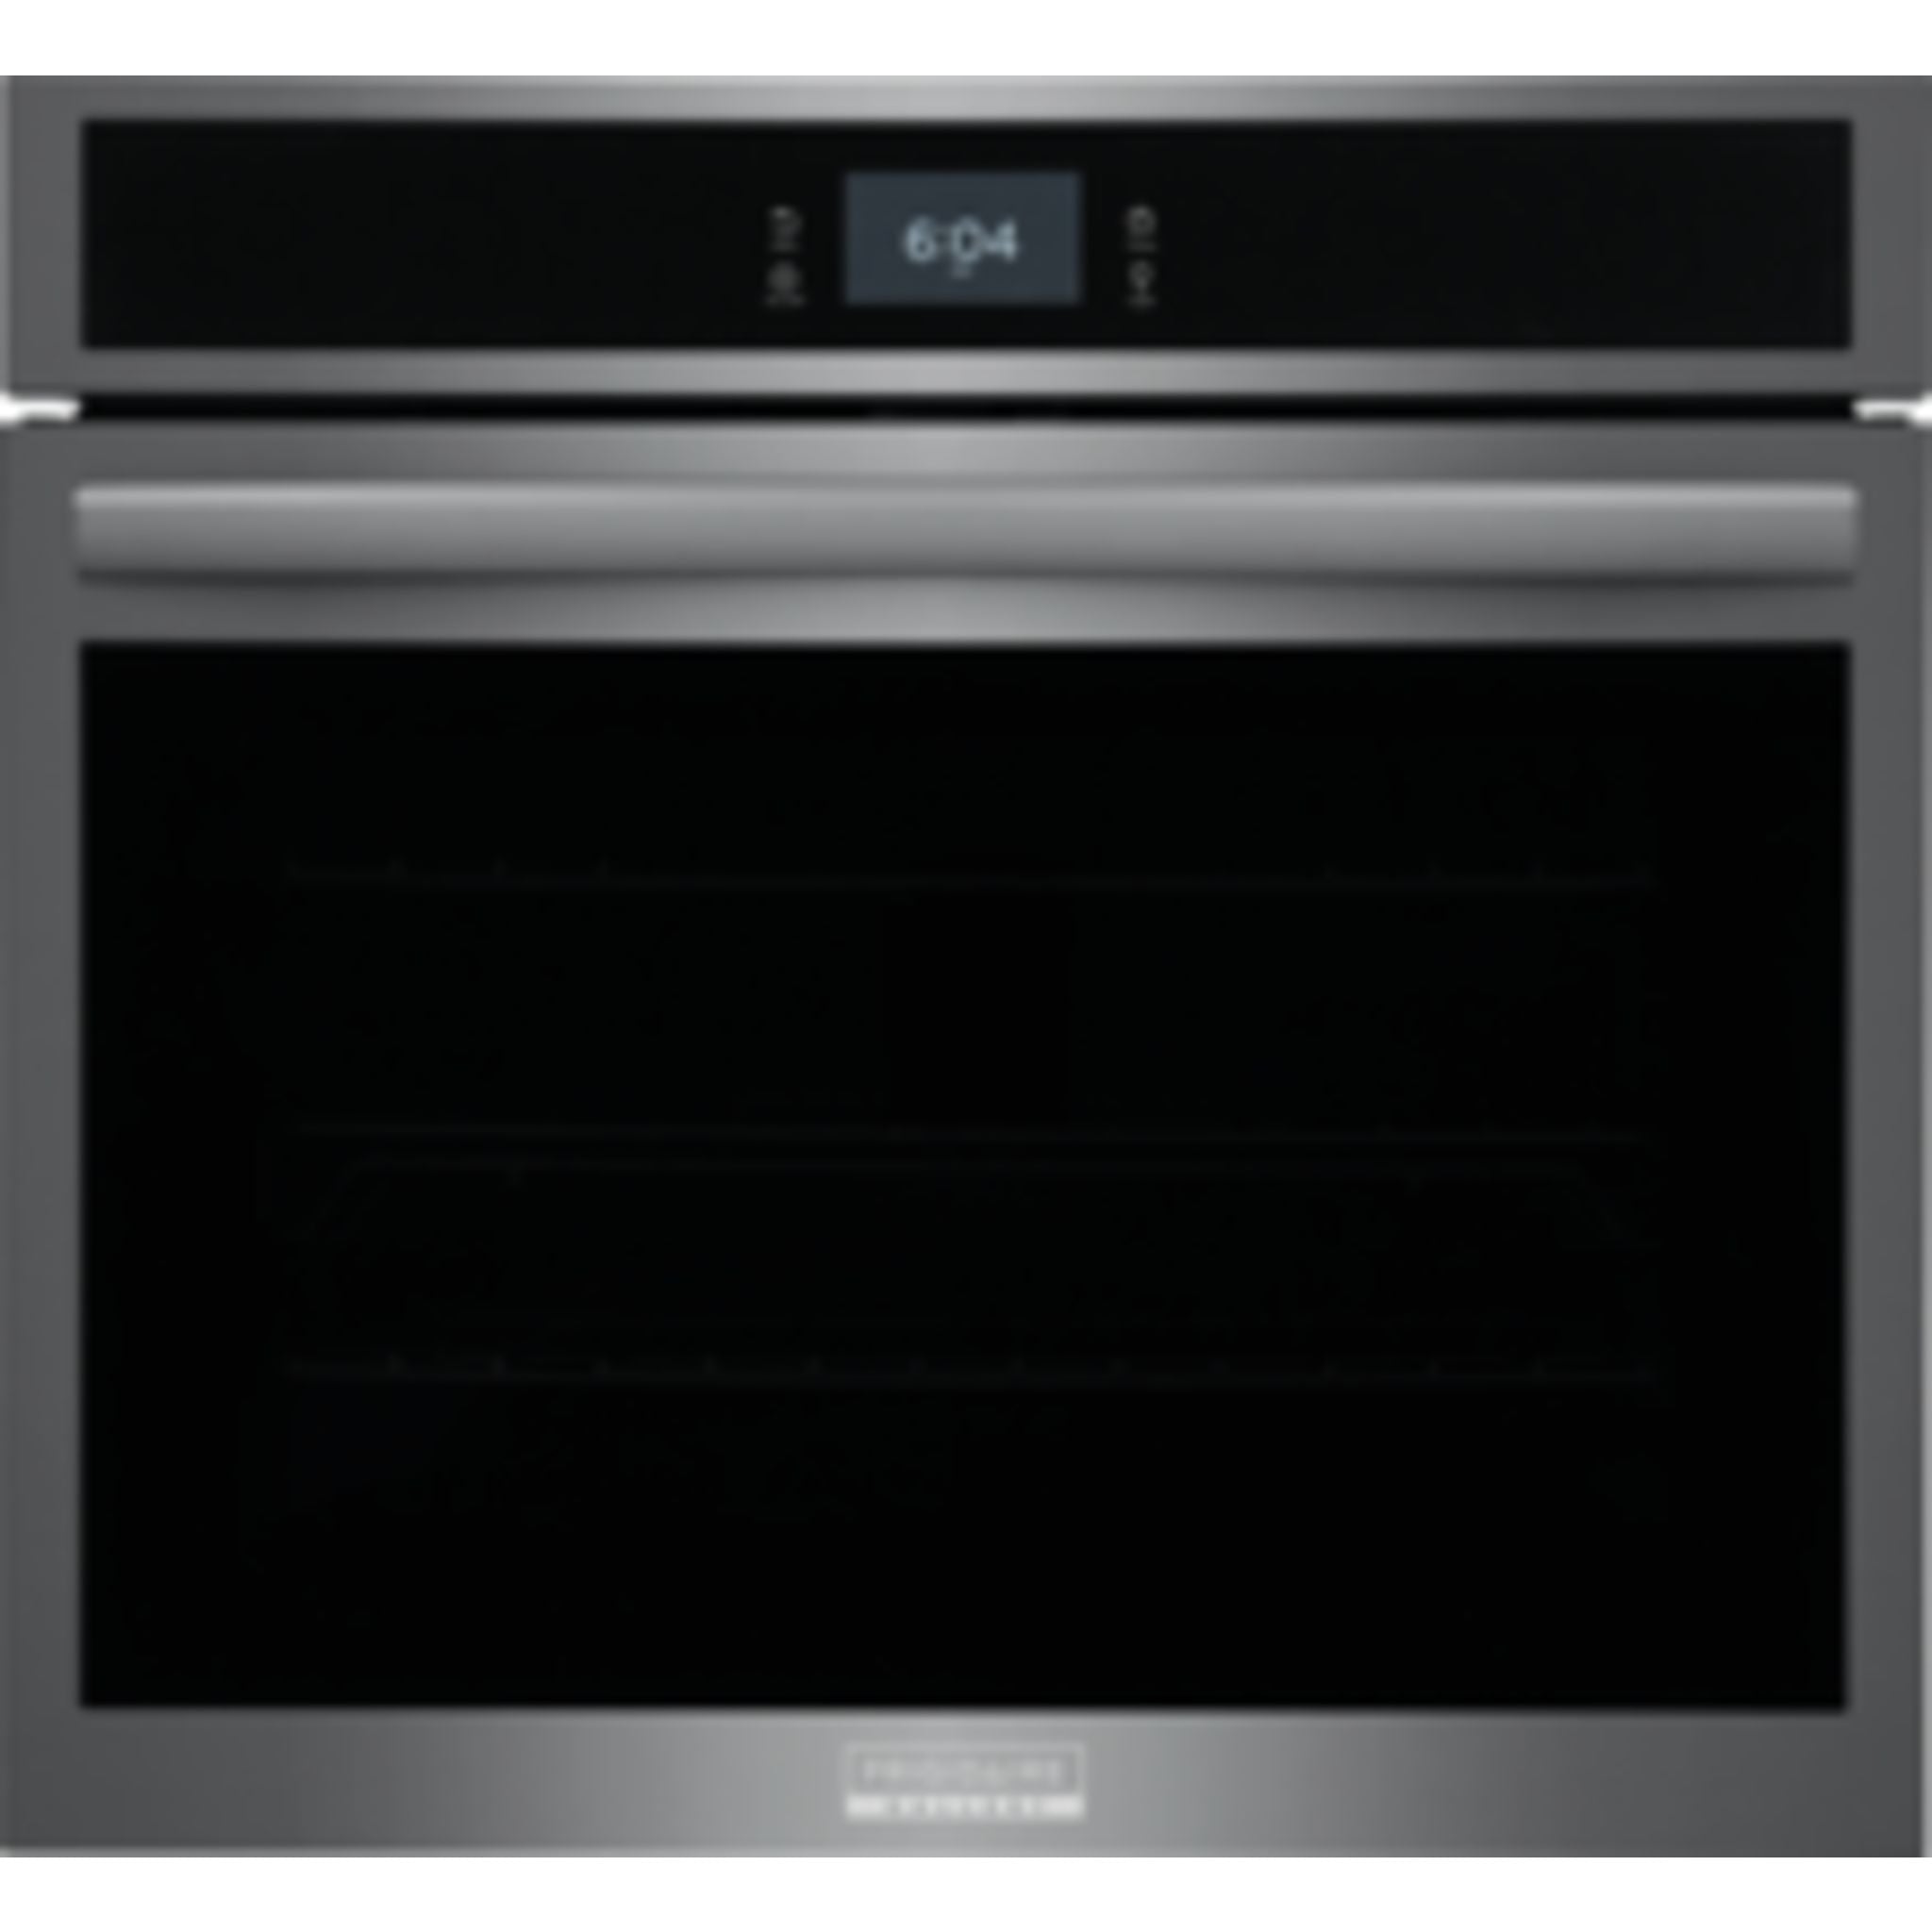 Frigidaire Gallery, Frigidaire Gallery 30" True Convection Wall Oven (GCWS3067AD) - Stainless Steel